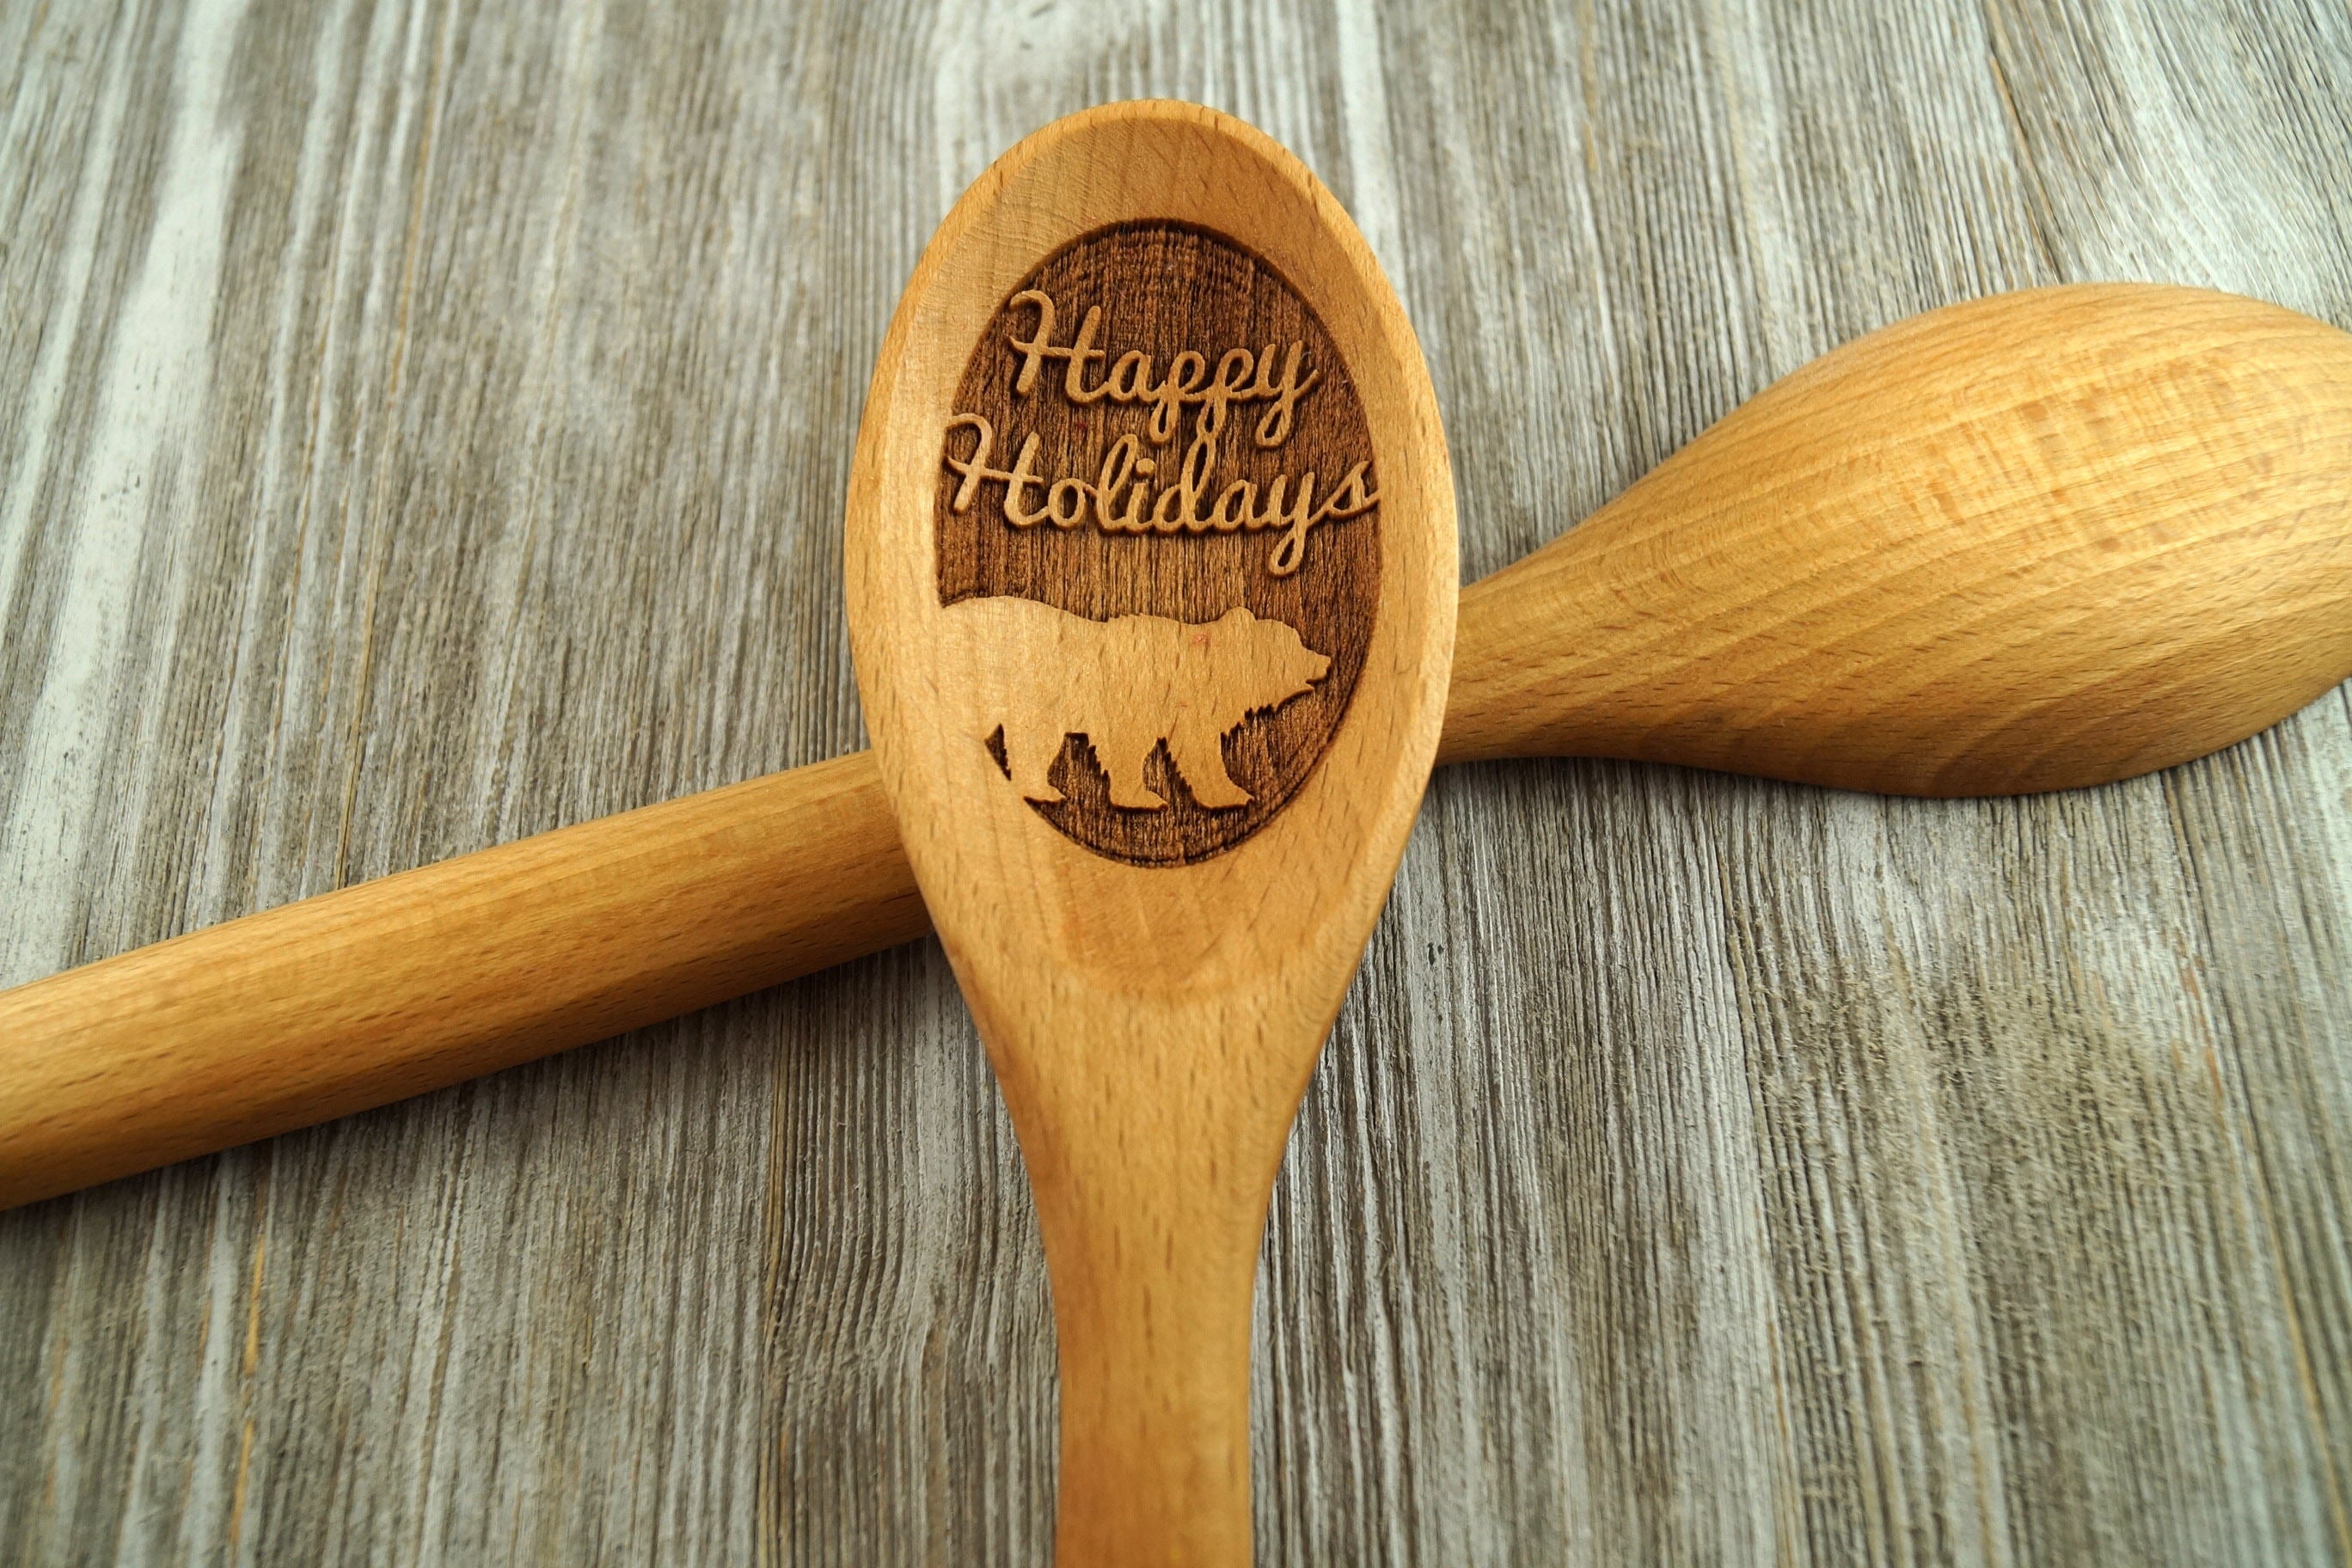 Personalized Christmas Gifts for Mom From Daughter Son - Mom Birthday Gifts  Women Mother's Day Gifts - Wooden Cooking Spoons with Funny Apron Kitchen